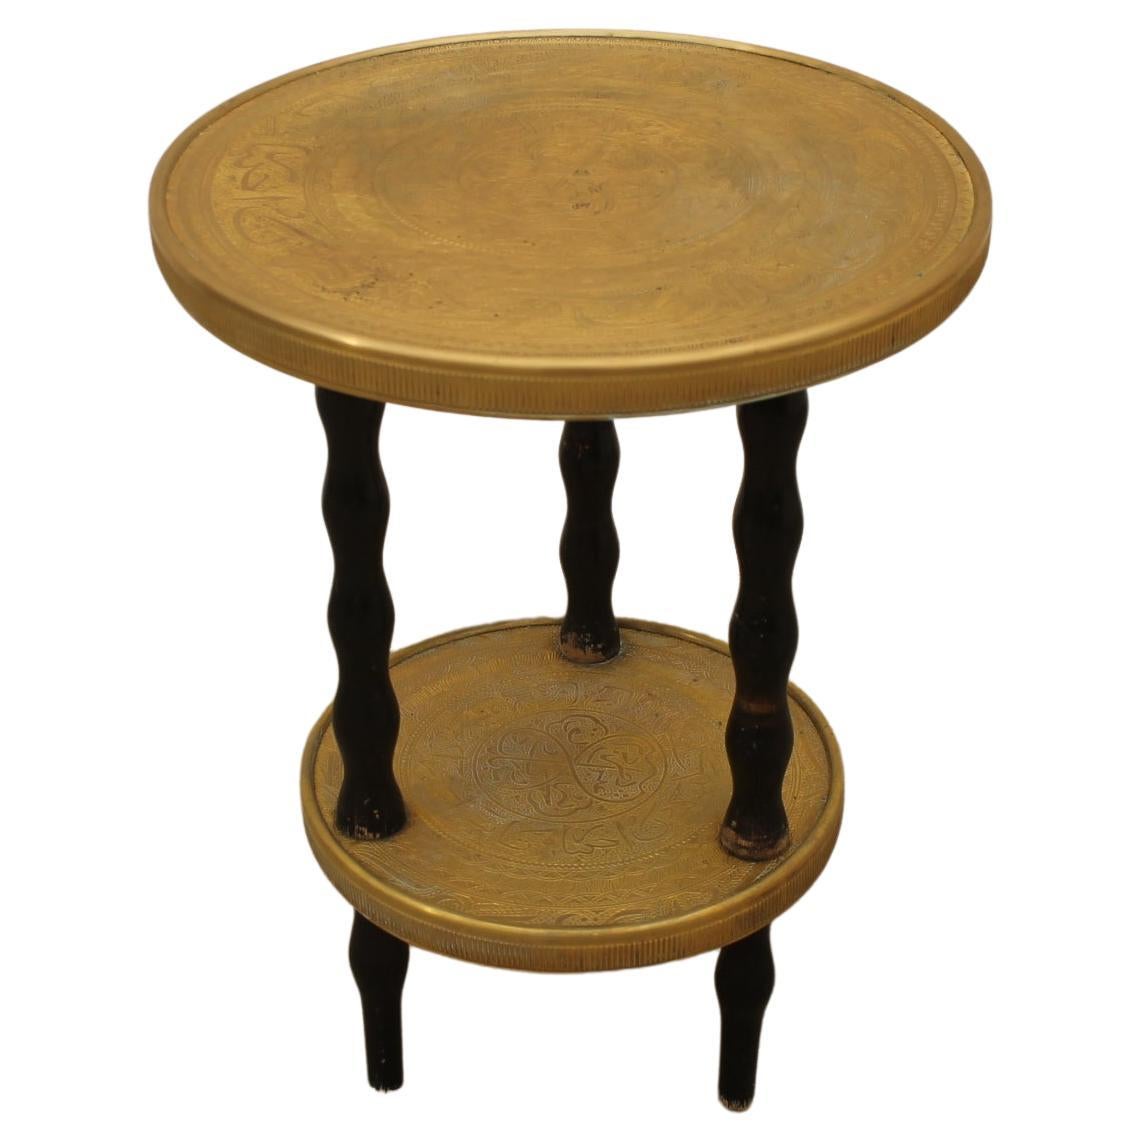 Art Deco Wood and Brass Round Side Table, Bohemia, 1930s For Sale